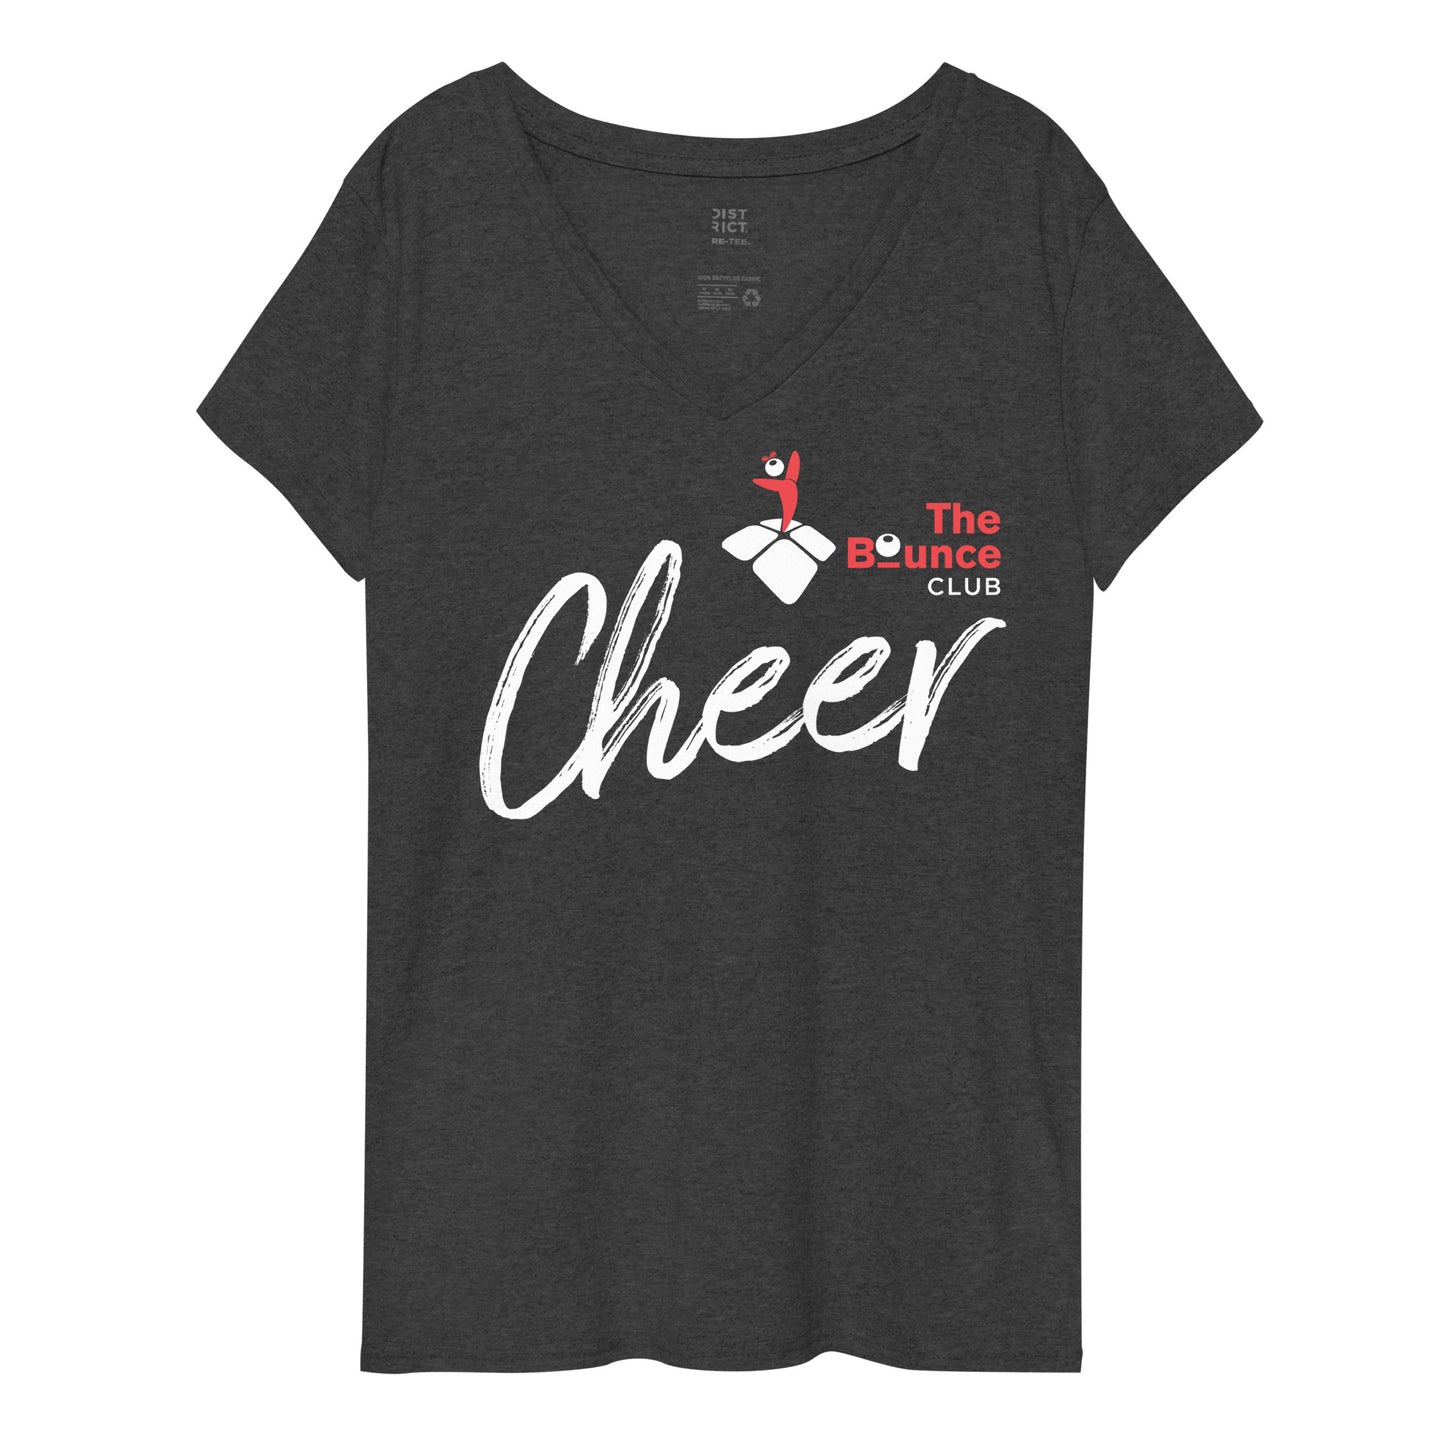 CHEER_The Bounce Club logo with bow in hair design - Women’s recycled v-neck t-shirt